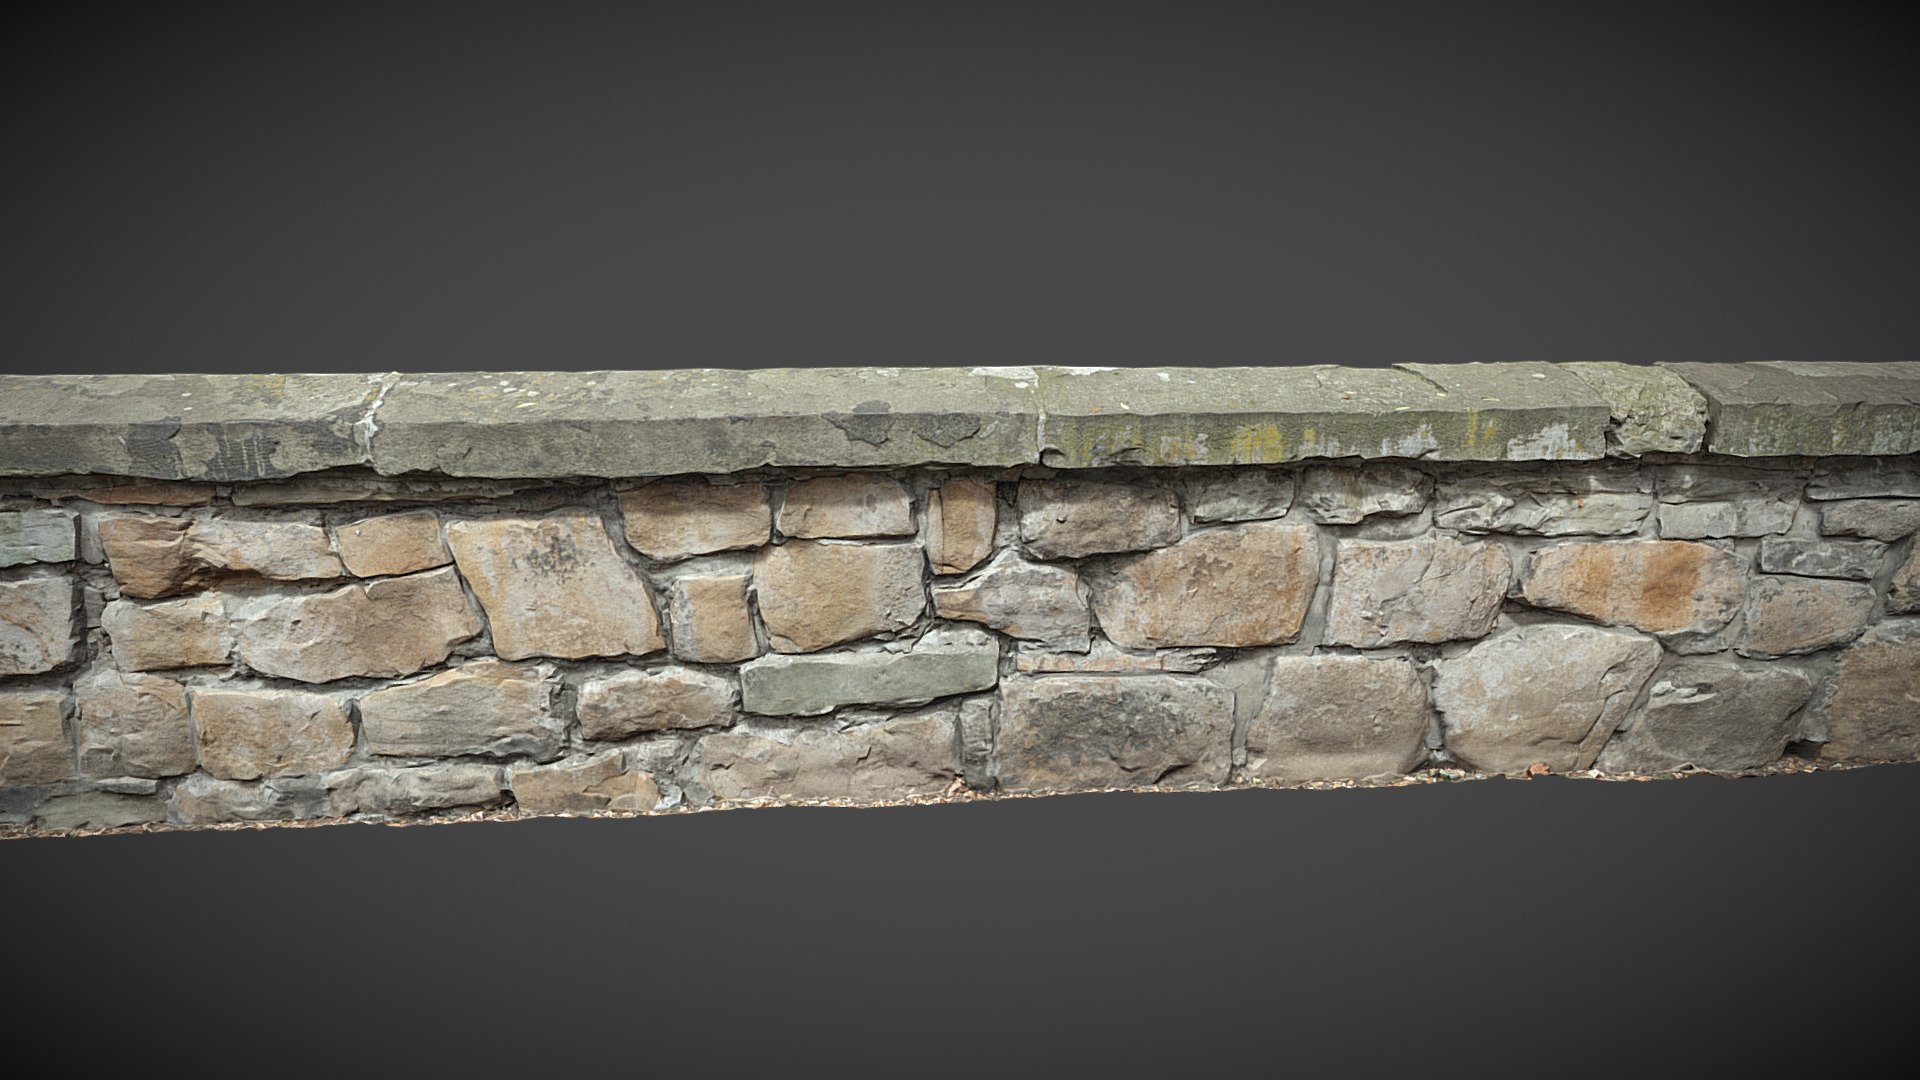 3D scan of part of an older damaged wall made of pieces of stone covered with concrete blocks.

Reconstructed from 98 DSLR images.

8k texture and normal 3d model